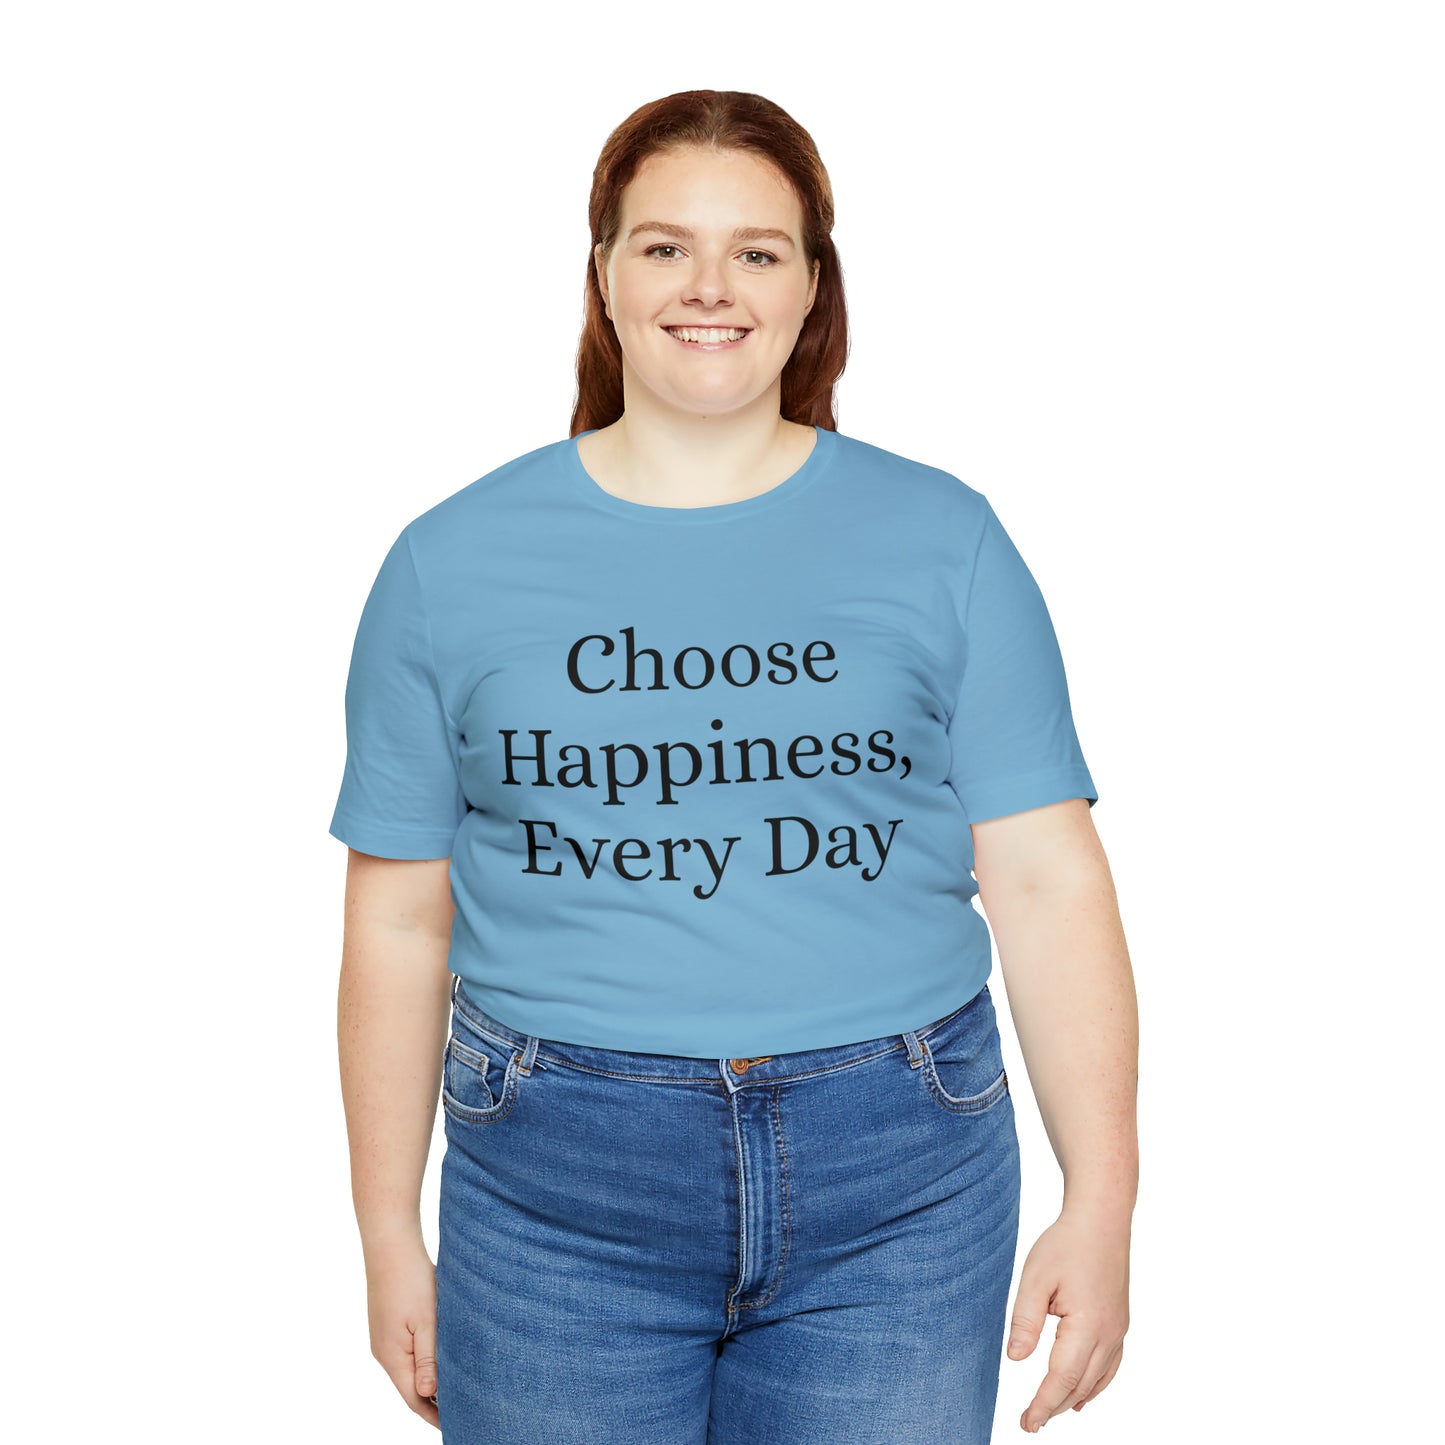 Choose Happiness, Every Day